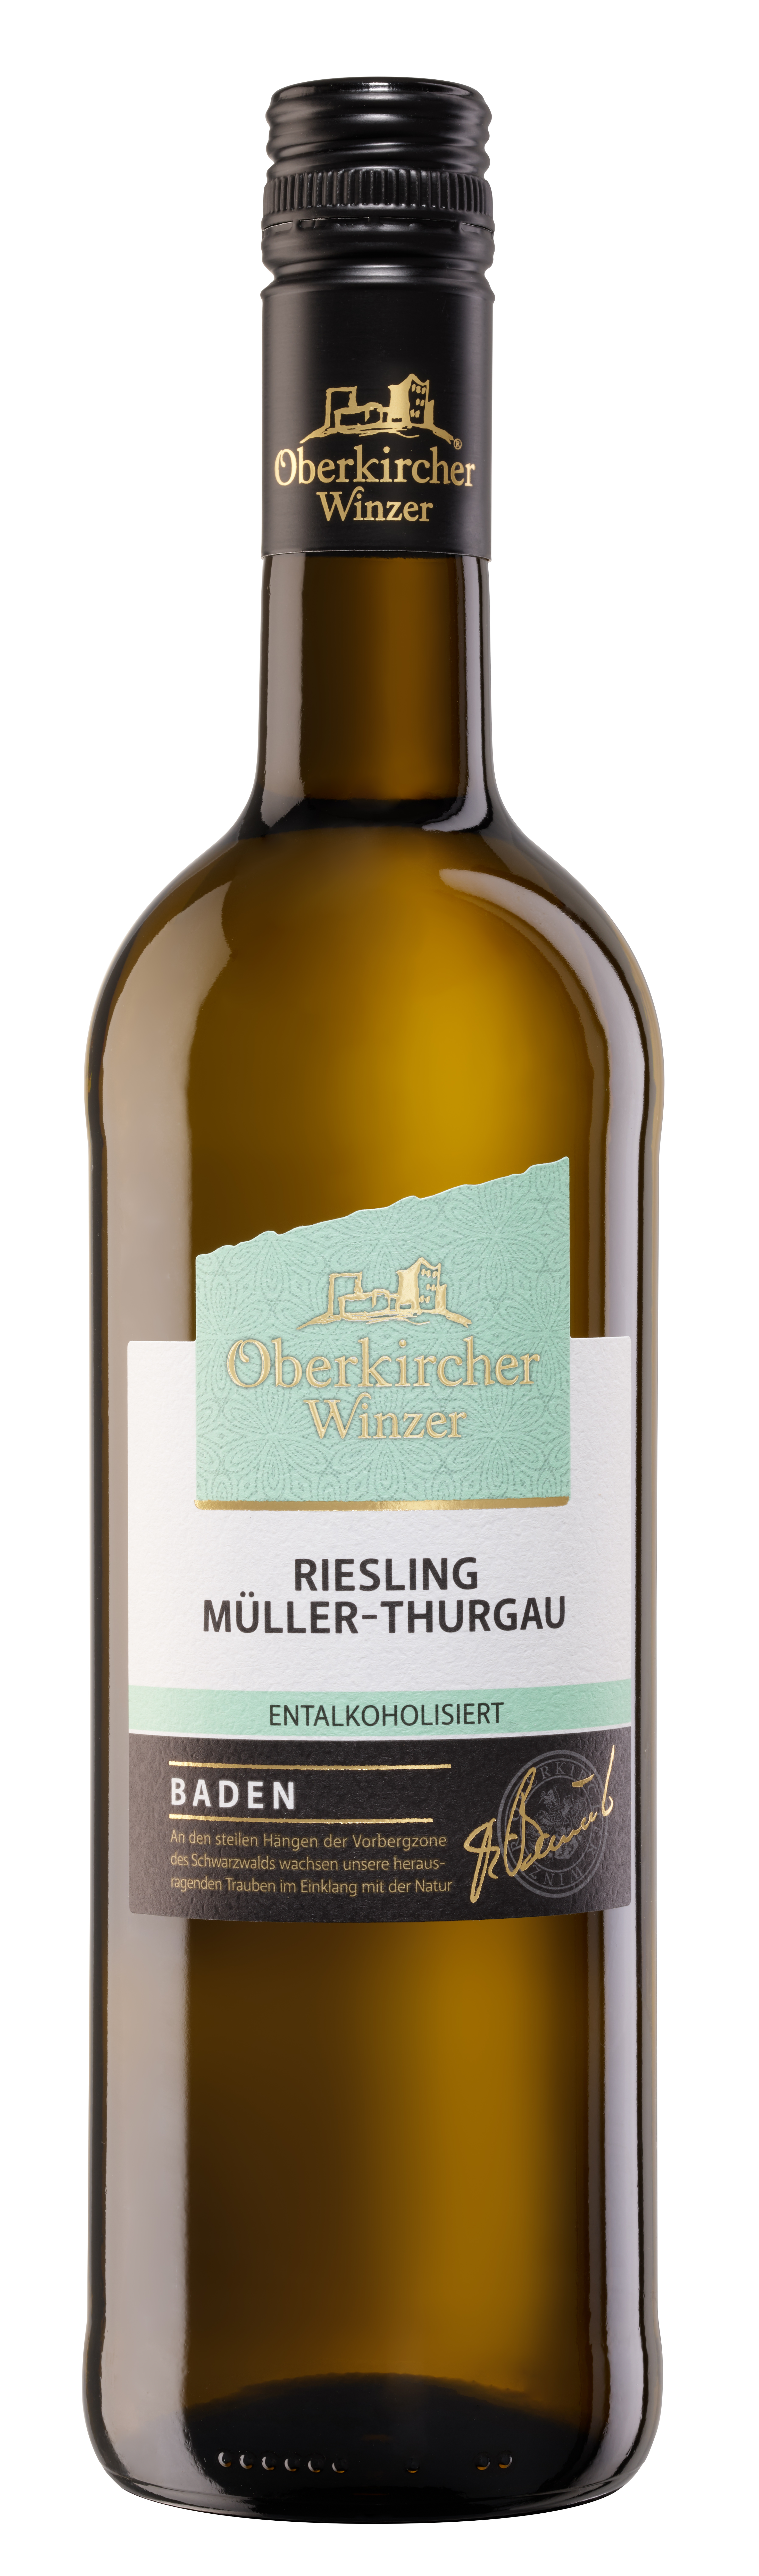 Collection Oberkirch, Riesling Müller-Thurgau entalkoholisiert